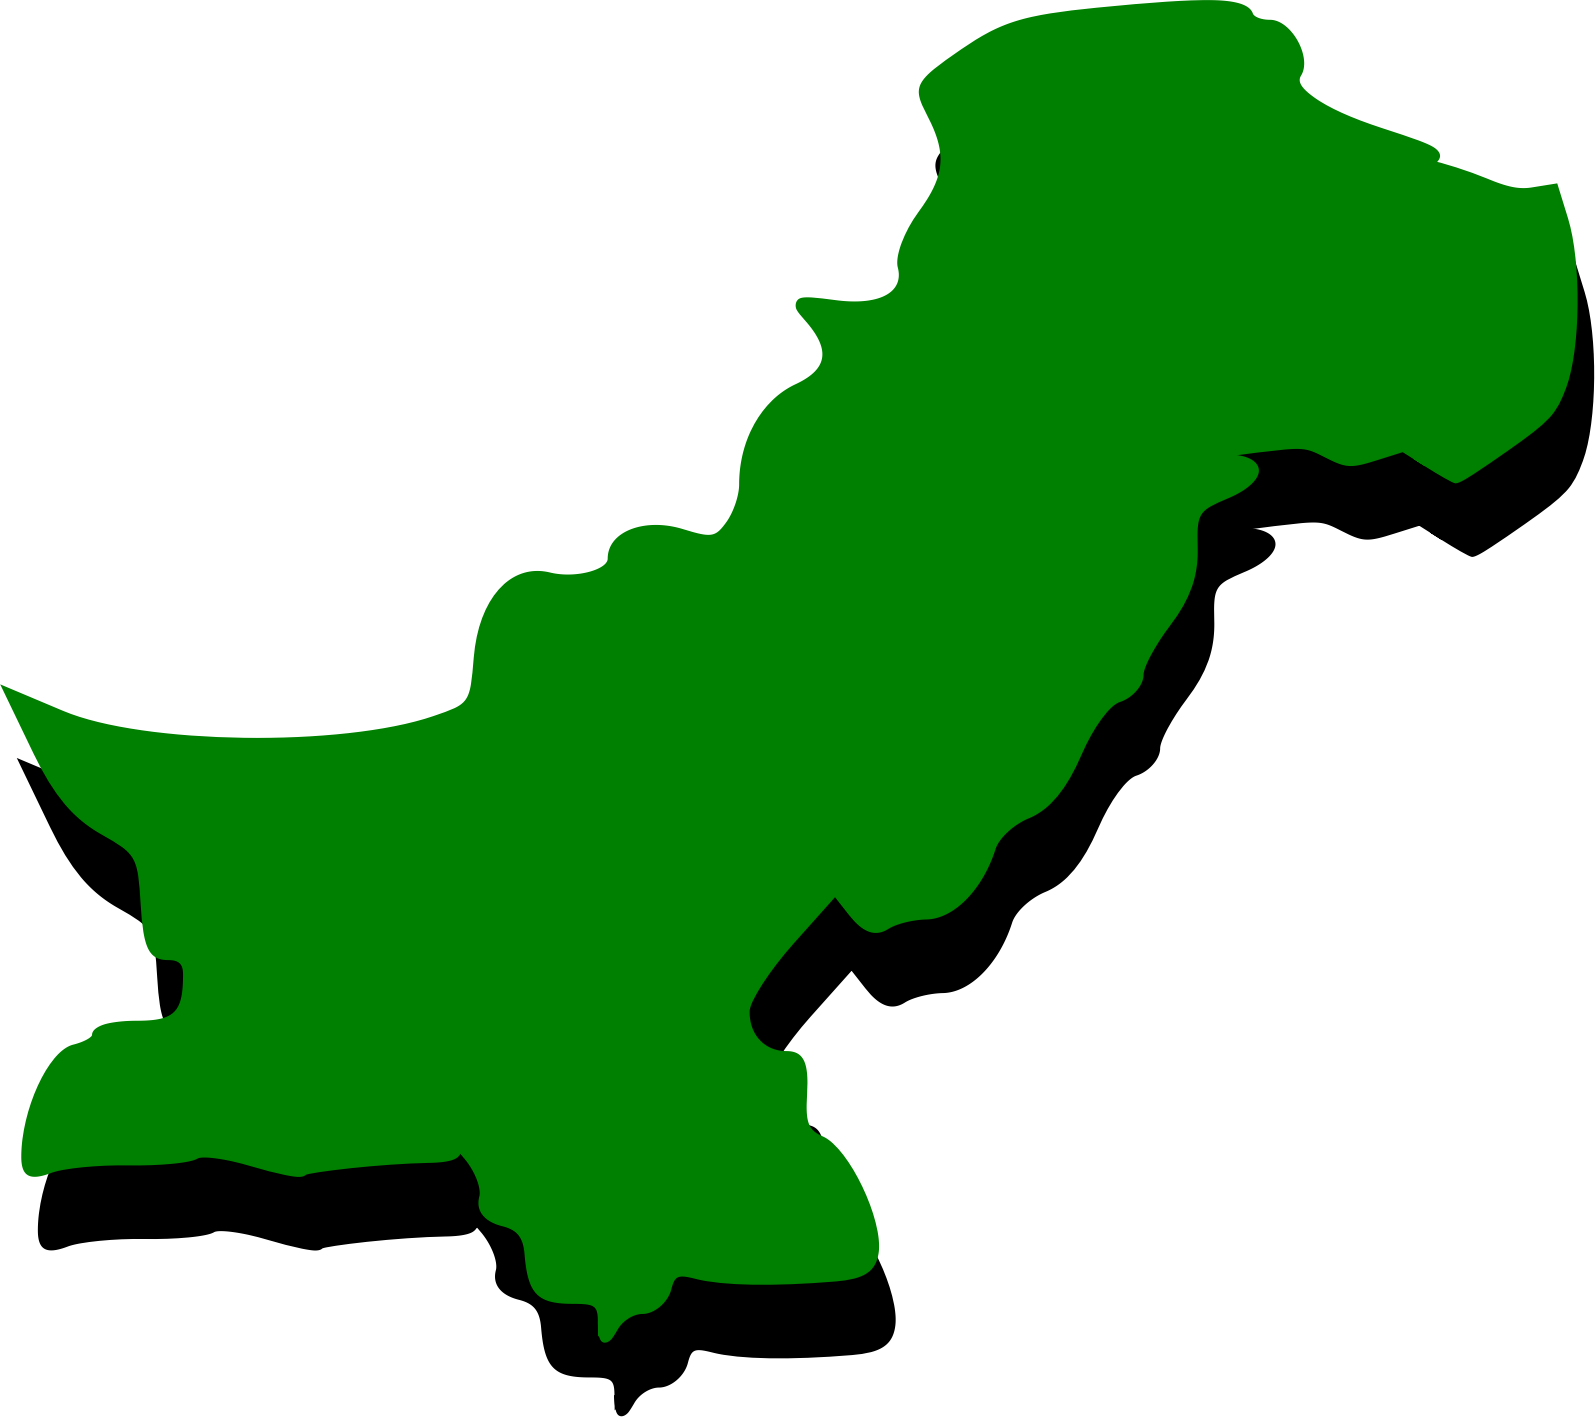 Clipart - Embossed outline map of Pakistan with green fill